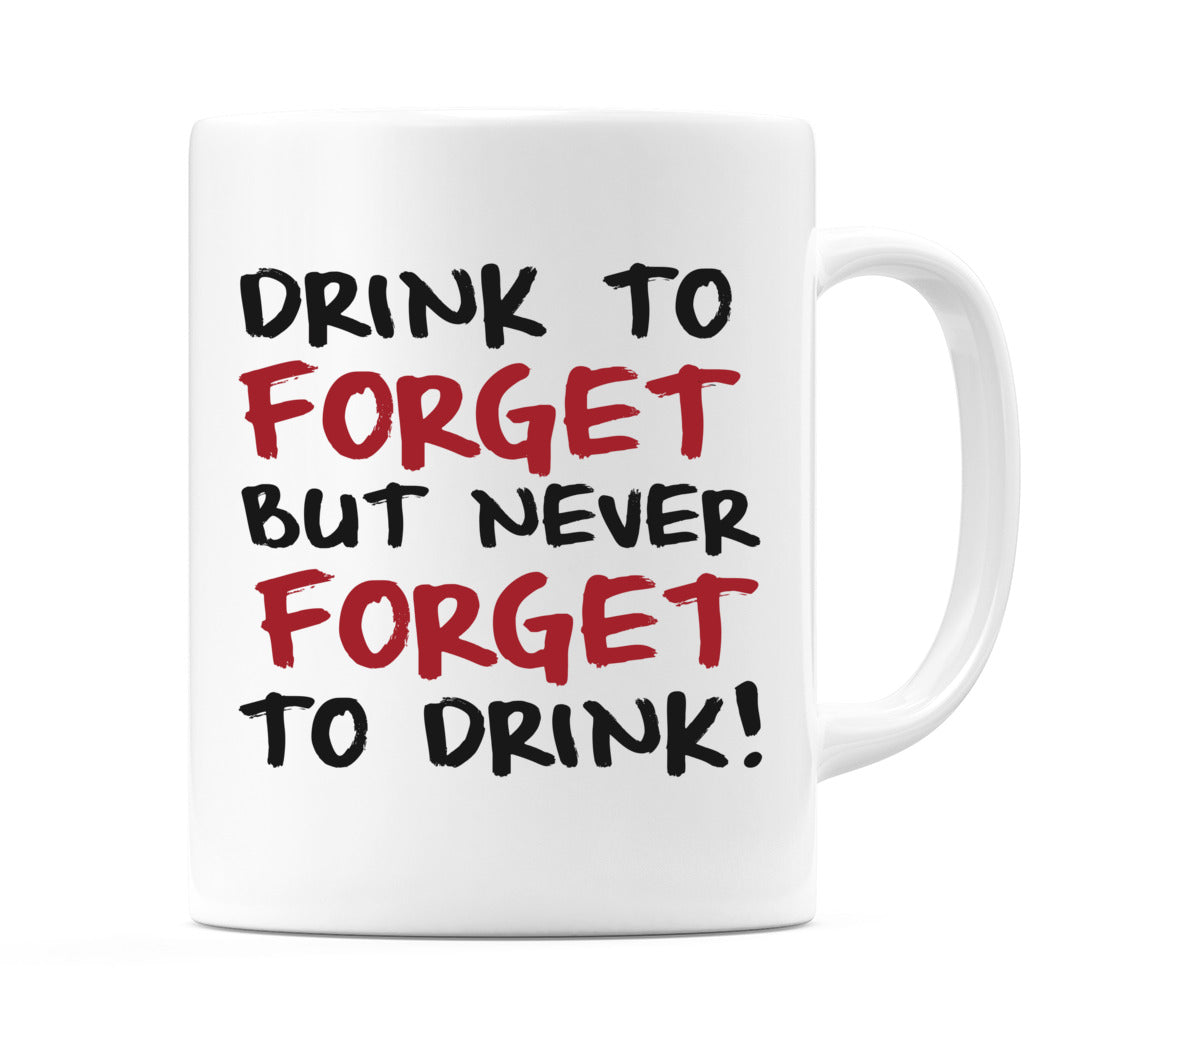 Drink To Forget But Never Forget To Drink! Mug